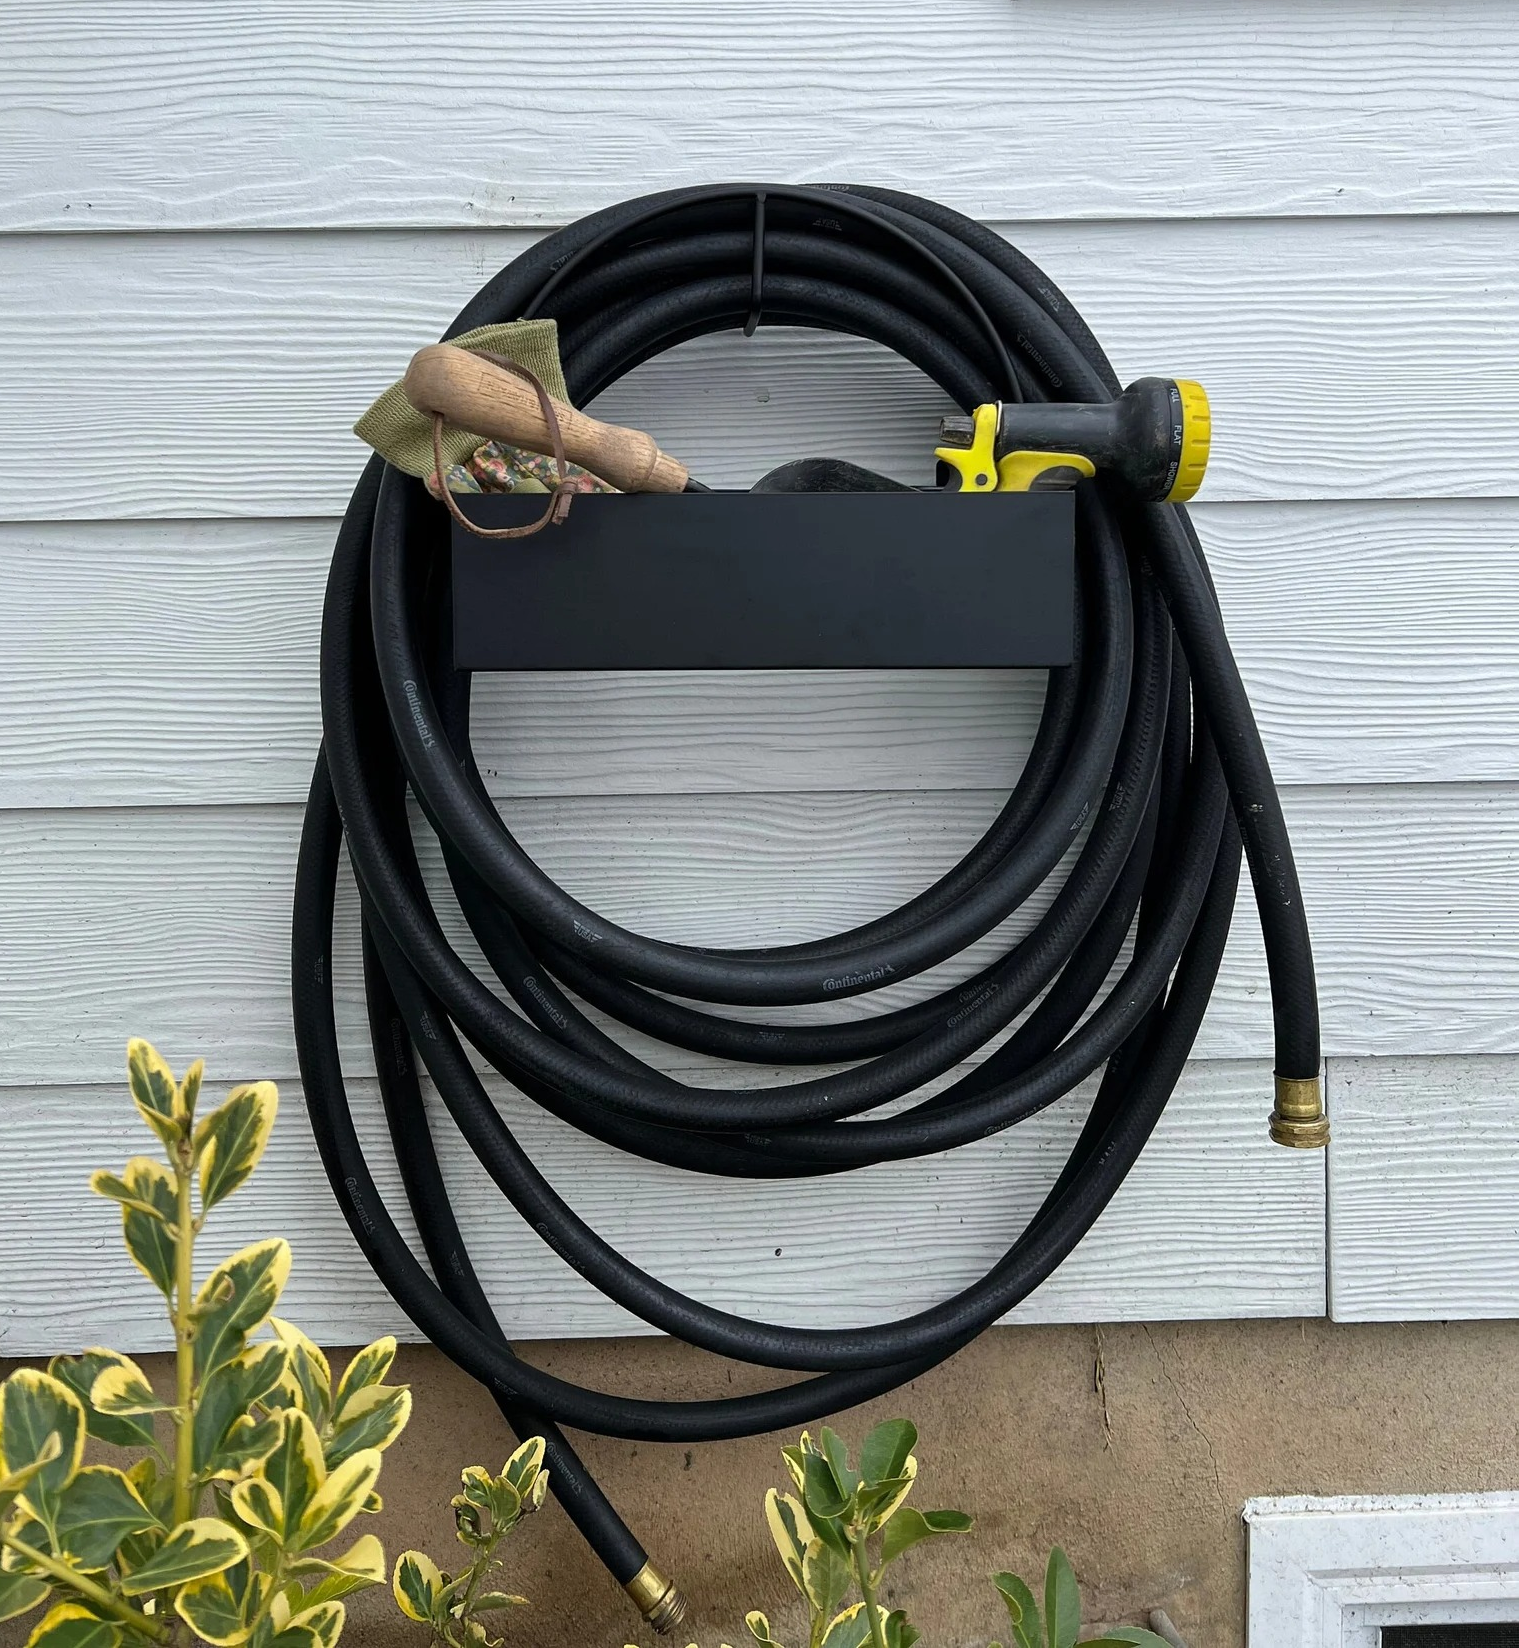 the black hose holder attached to the side of a house with a hose wrapped around it and various gardening supplies in its shelf